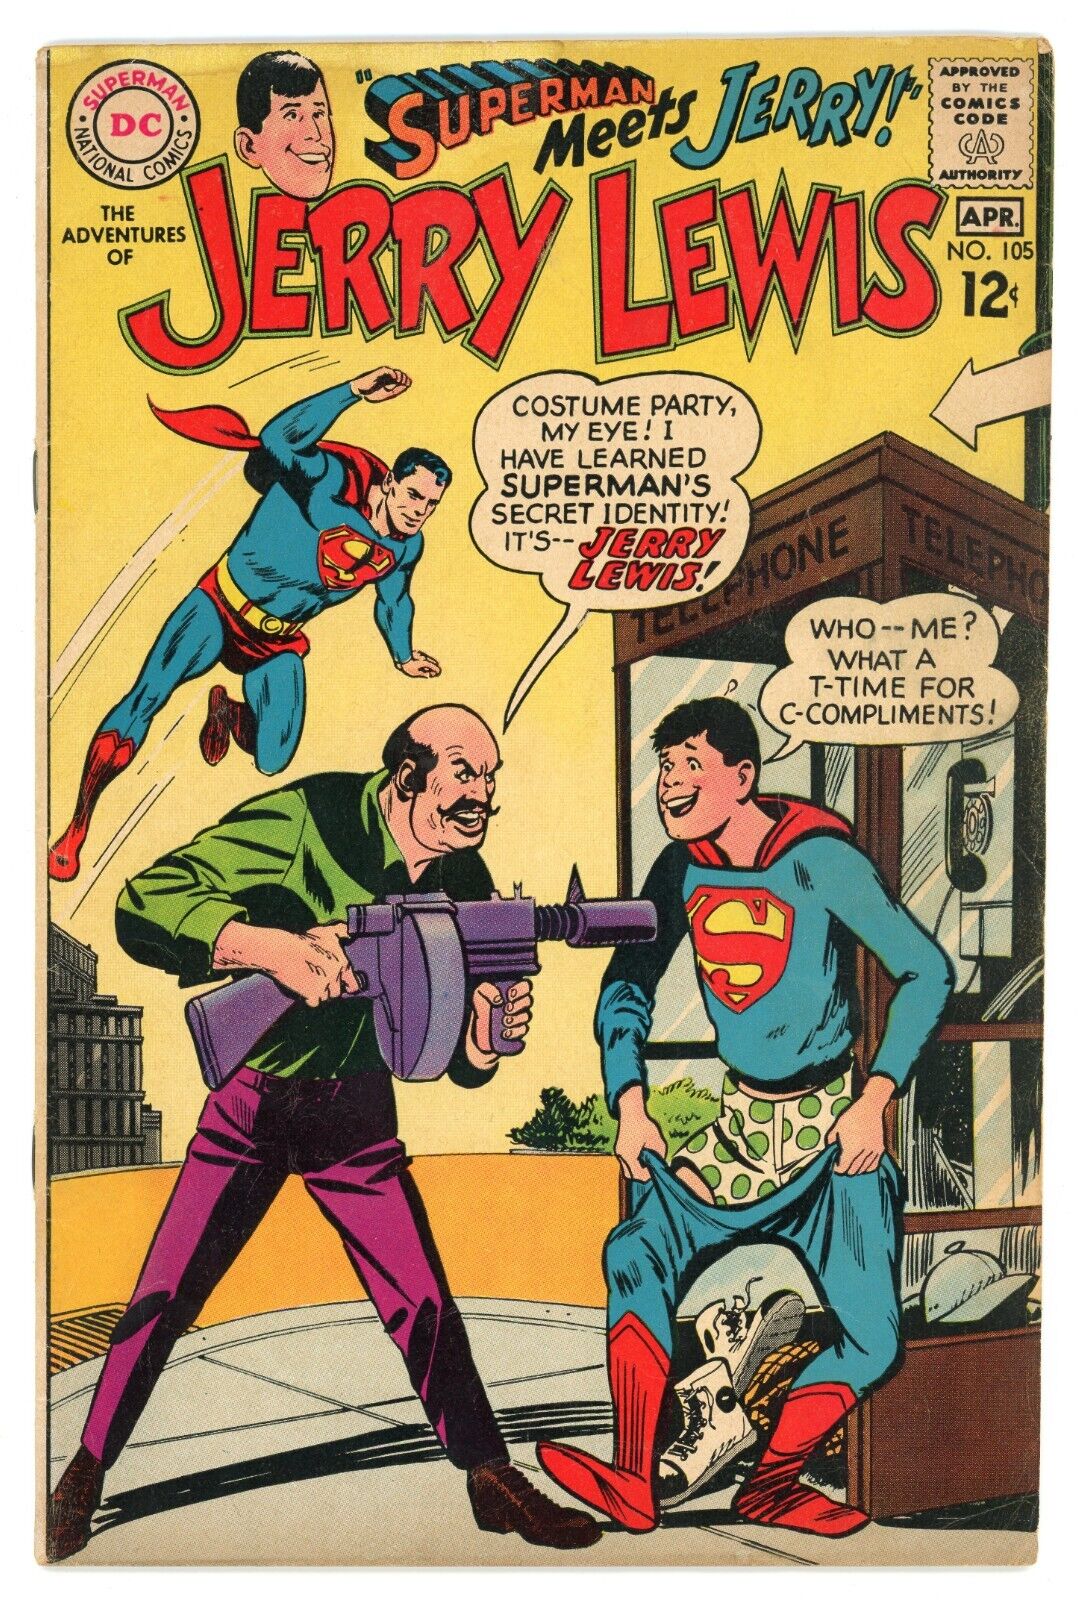 The Adventures of Jerry Lewis #105 Superman Meets Jerry DC Comics 1968